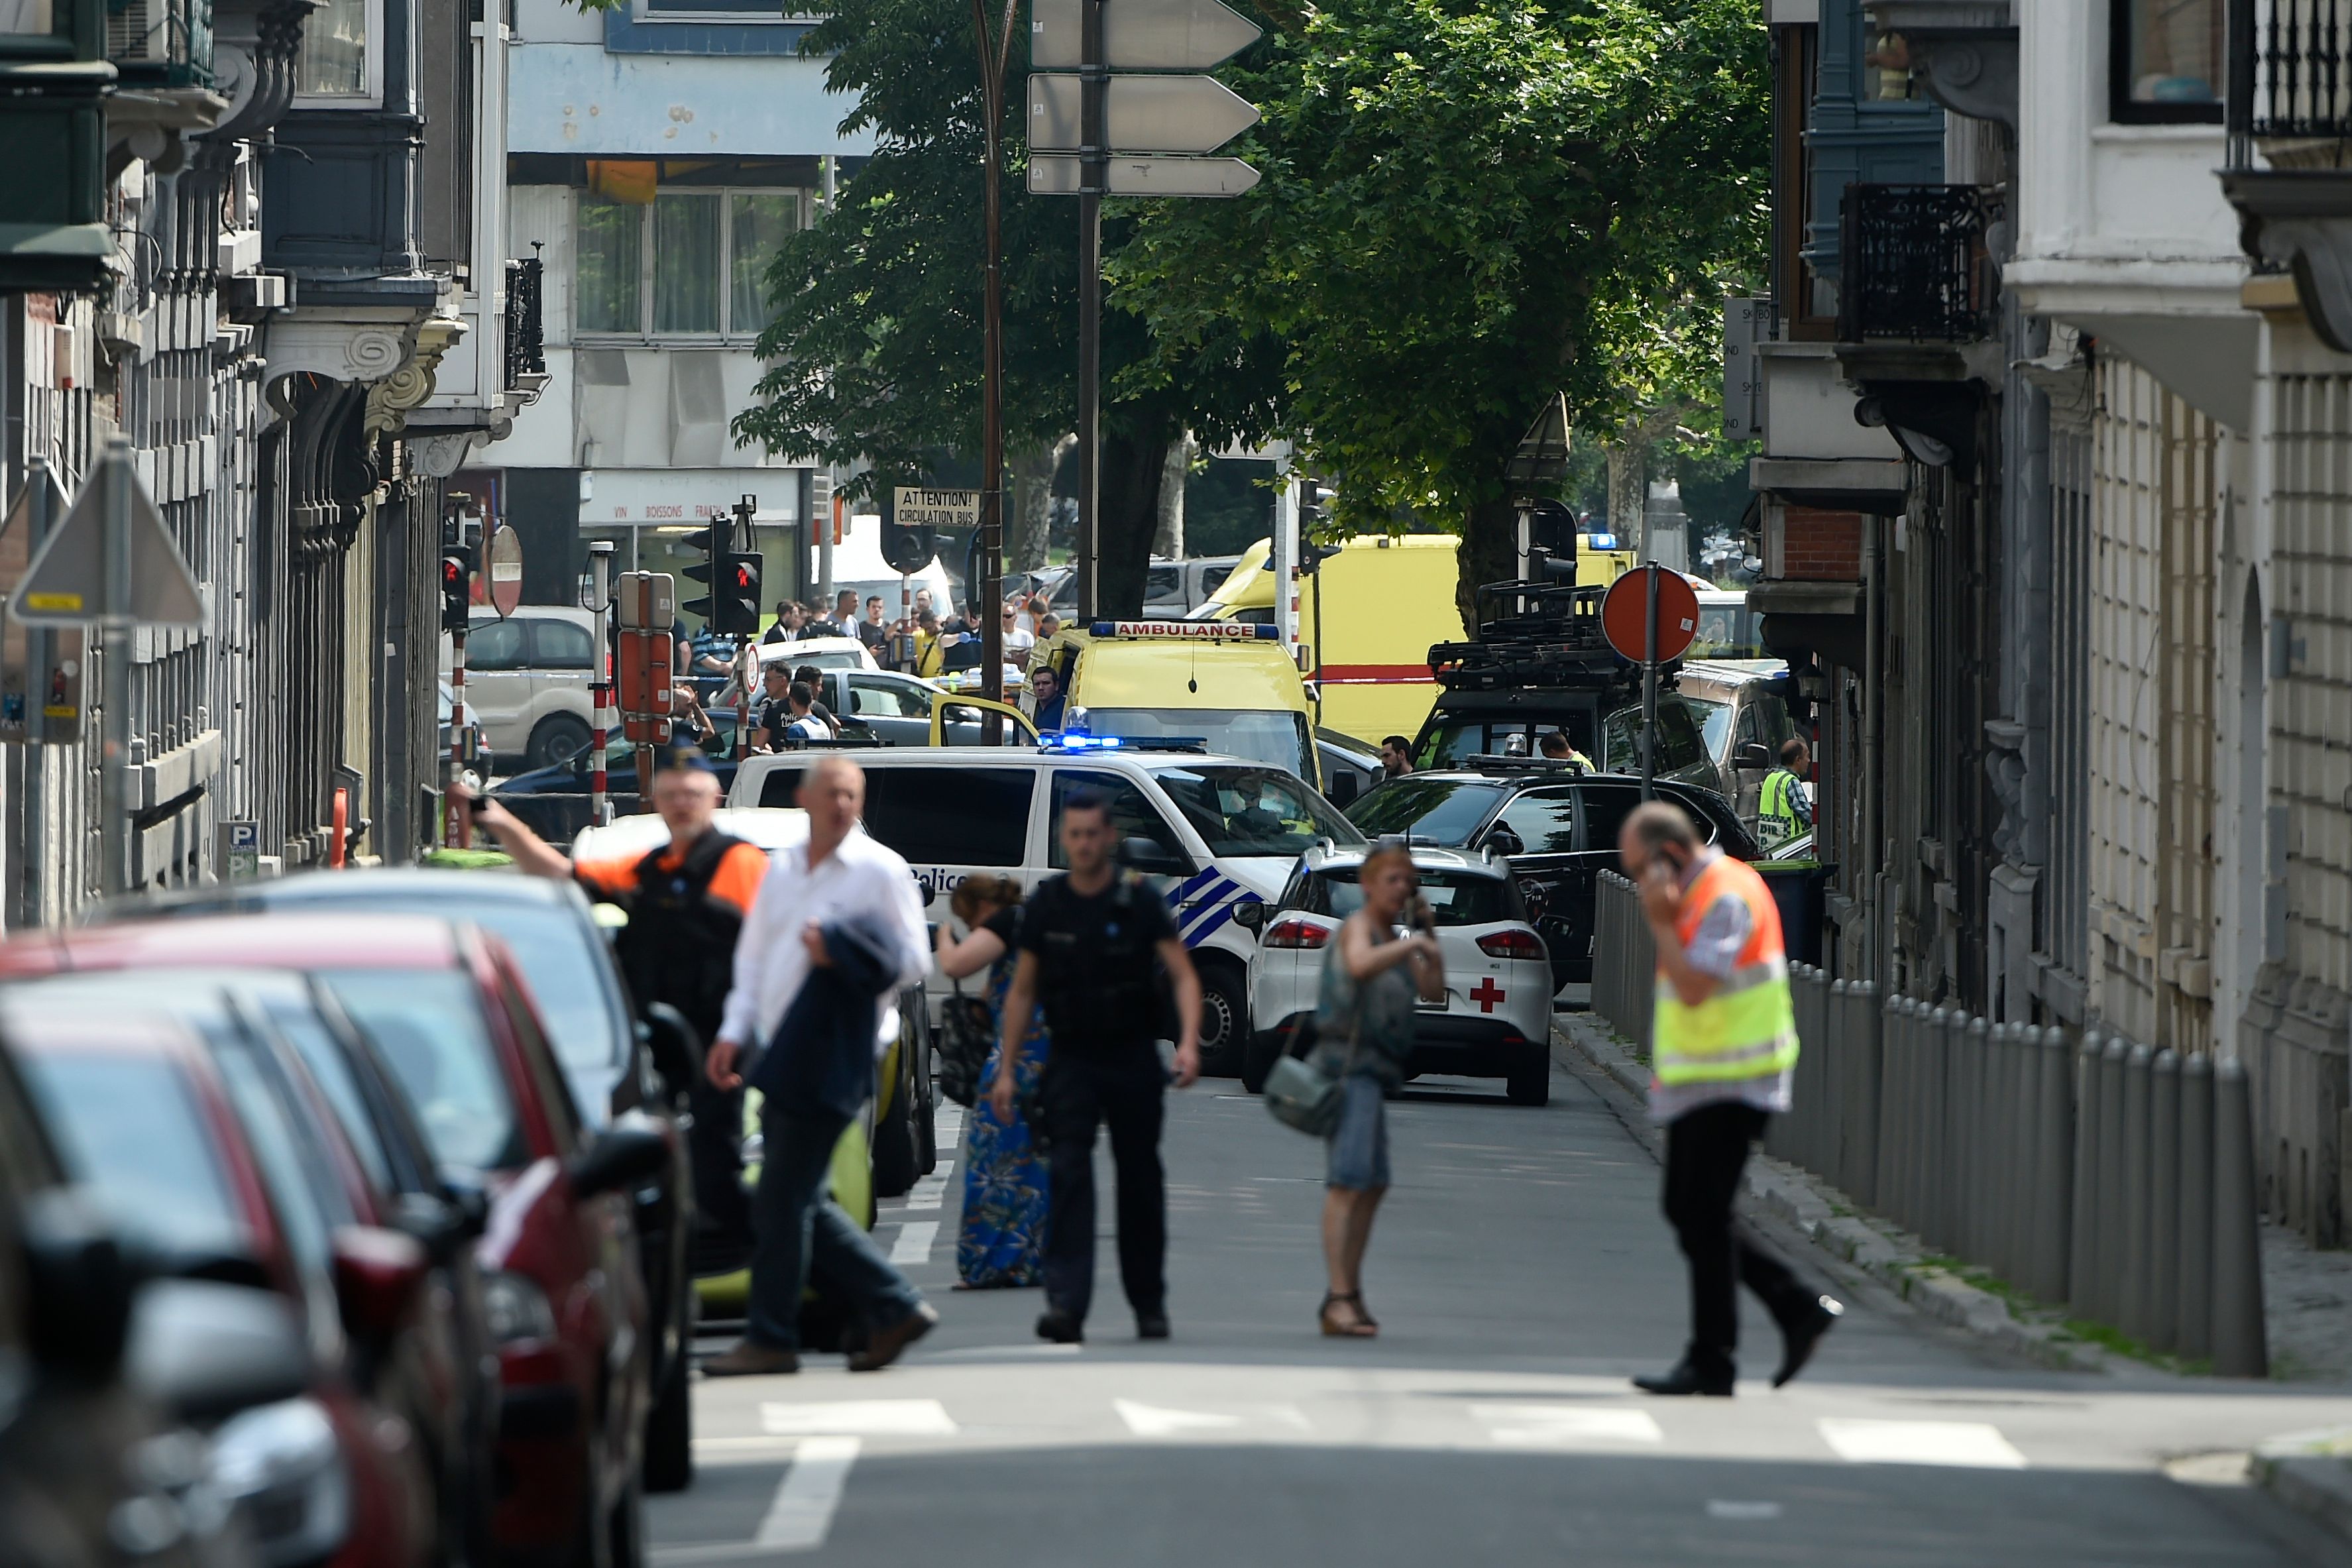 Police and ambulance are seen at the site where a gunman shot dead three people, two of them policemen, before being killed by elite officers, in the eastern Belgian city of Liege on May 29, 2018. - The shooting occurred around 10:30am (0830 GMT) on a major artery in the city close to a high school. "We don't know anything yet," the spokeswoman for the Liege prosecutors office, told AFP when asked about the shooter's motives. (Photo by JOHN THYS / AFP) (Photo credit should read JOHN THYS/AFP/Getty Images)